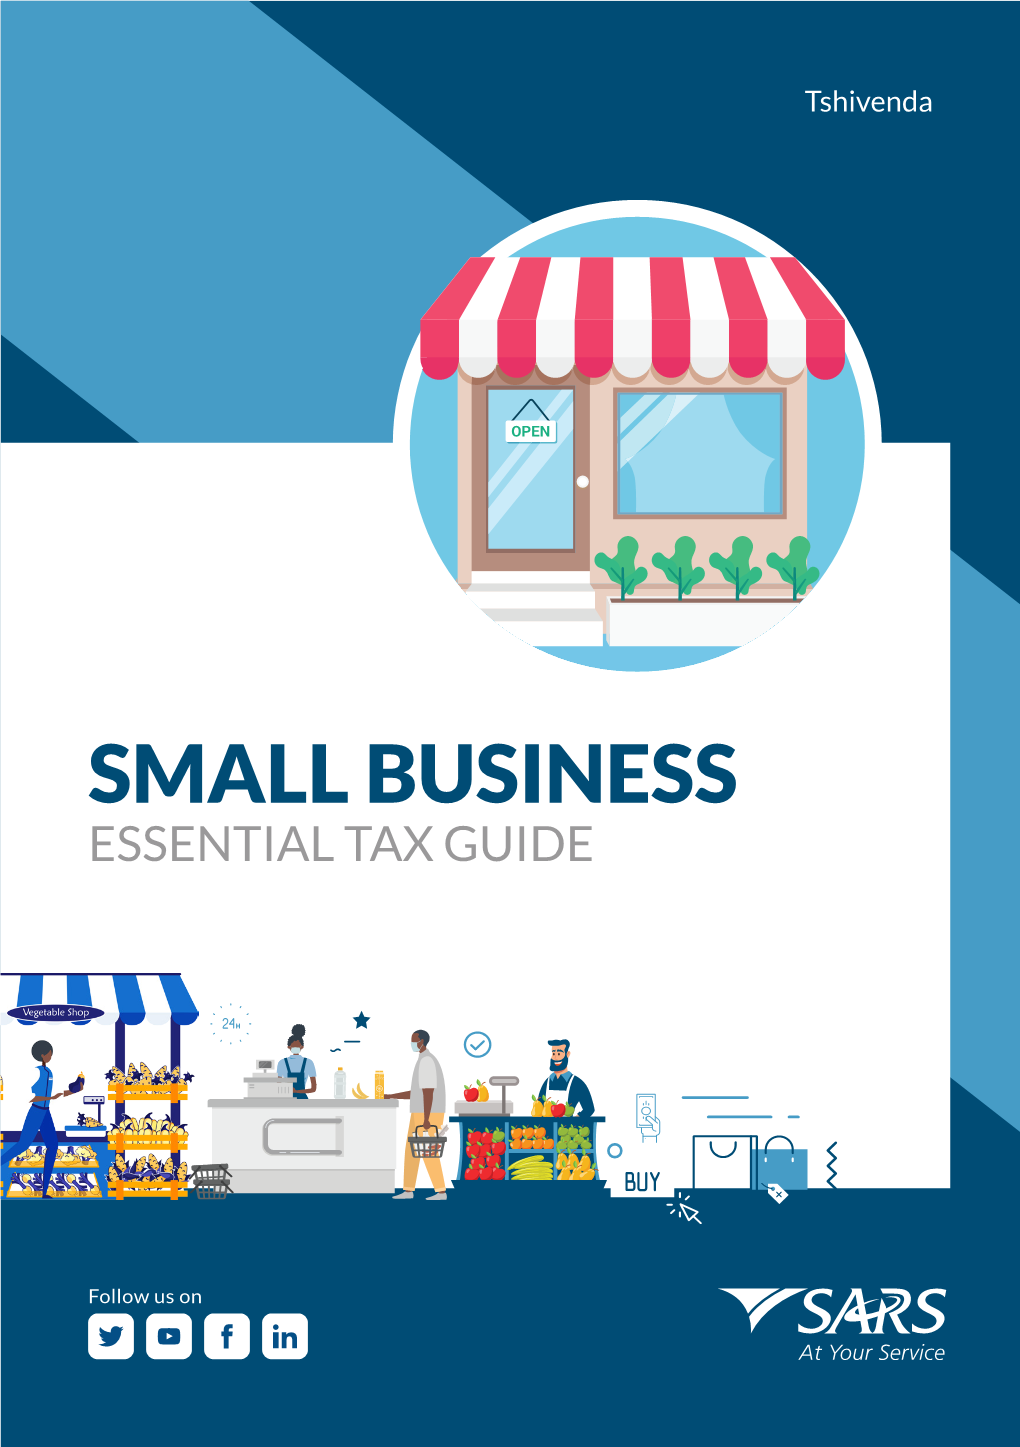 Small Business Essential Tax Guide